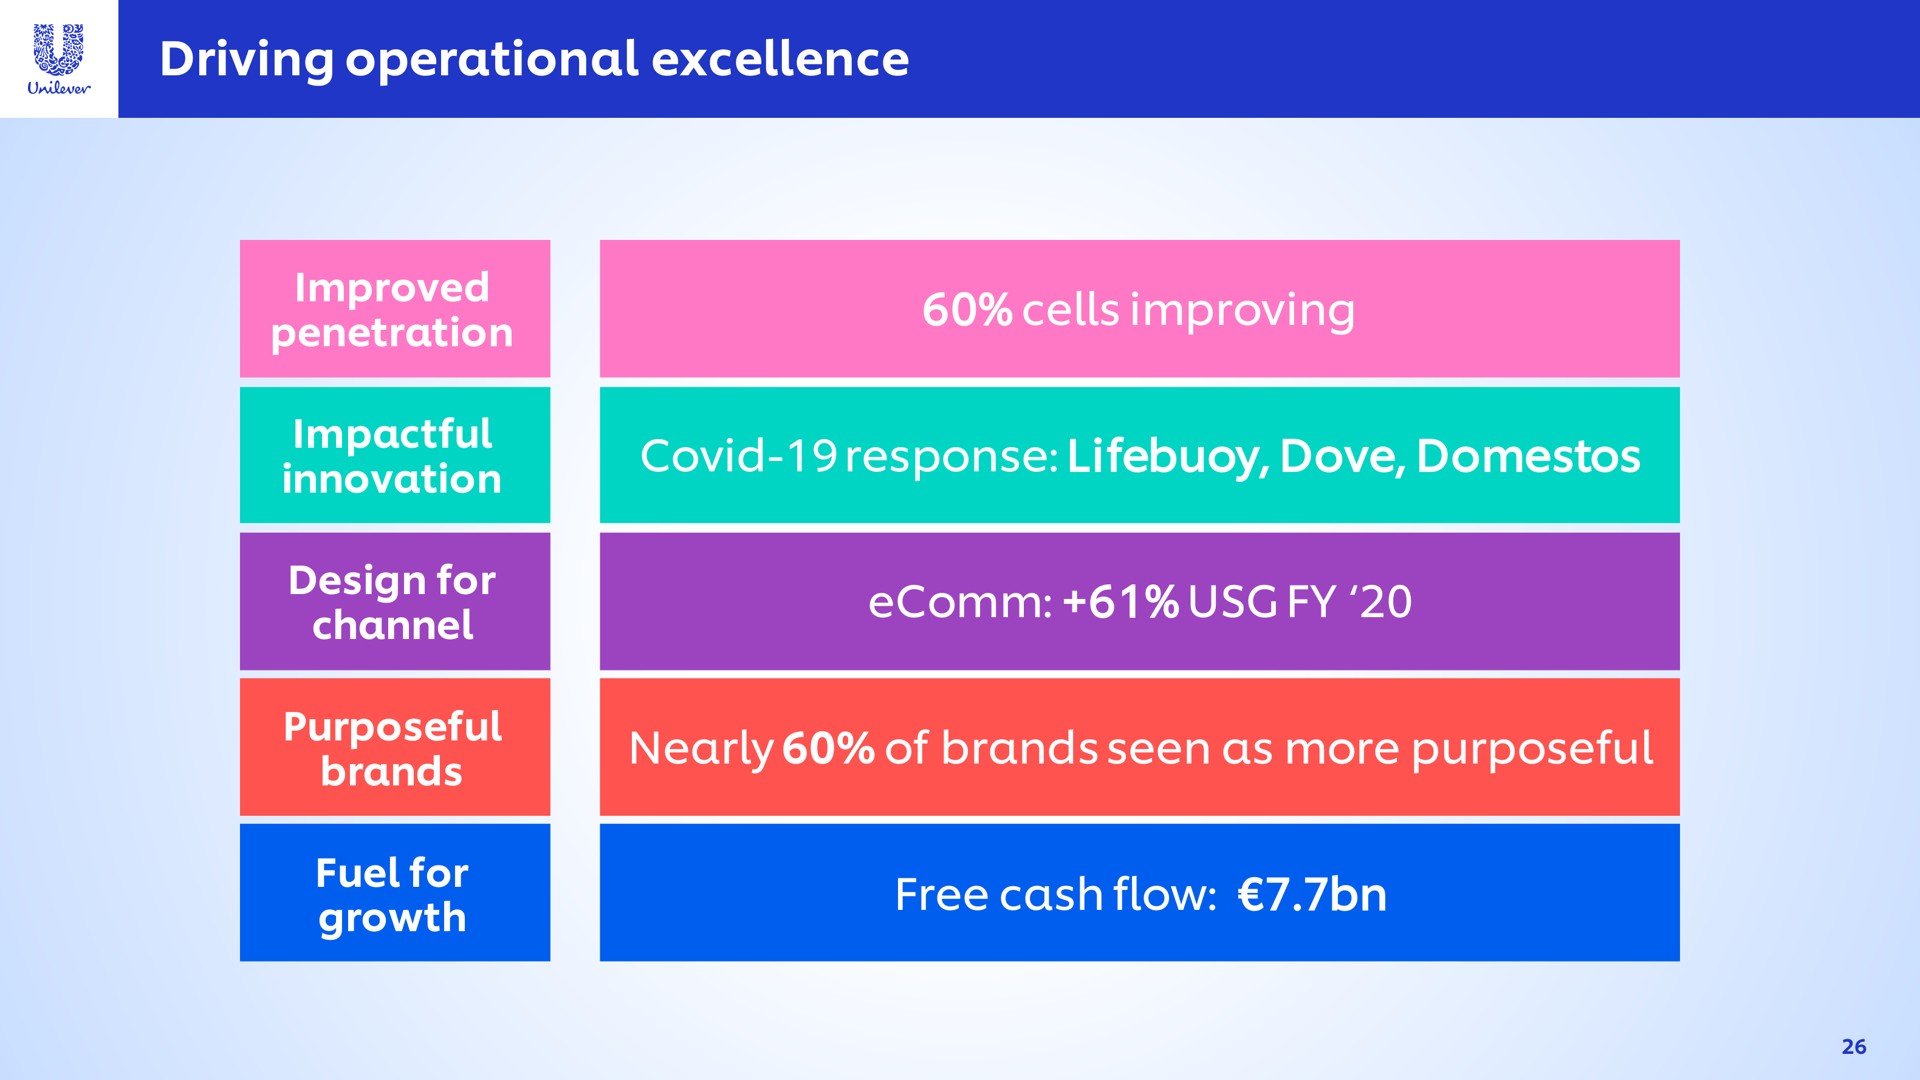 driving operational excellence cells improving covid response dove nearly of brands seen as more purposeful free cash flow improved penetration innovation design for channel mice growth | Unilever